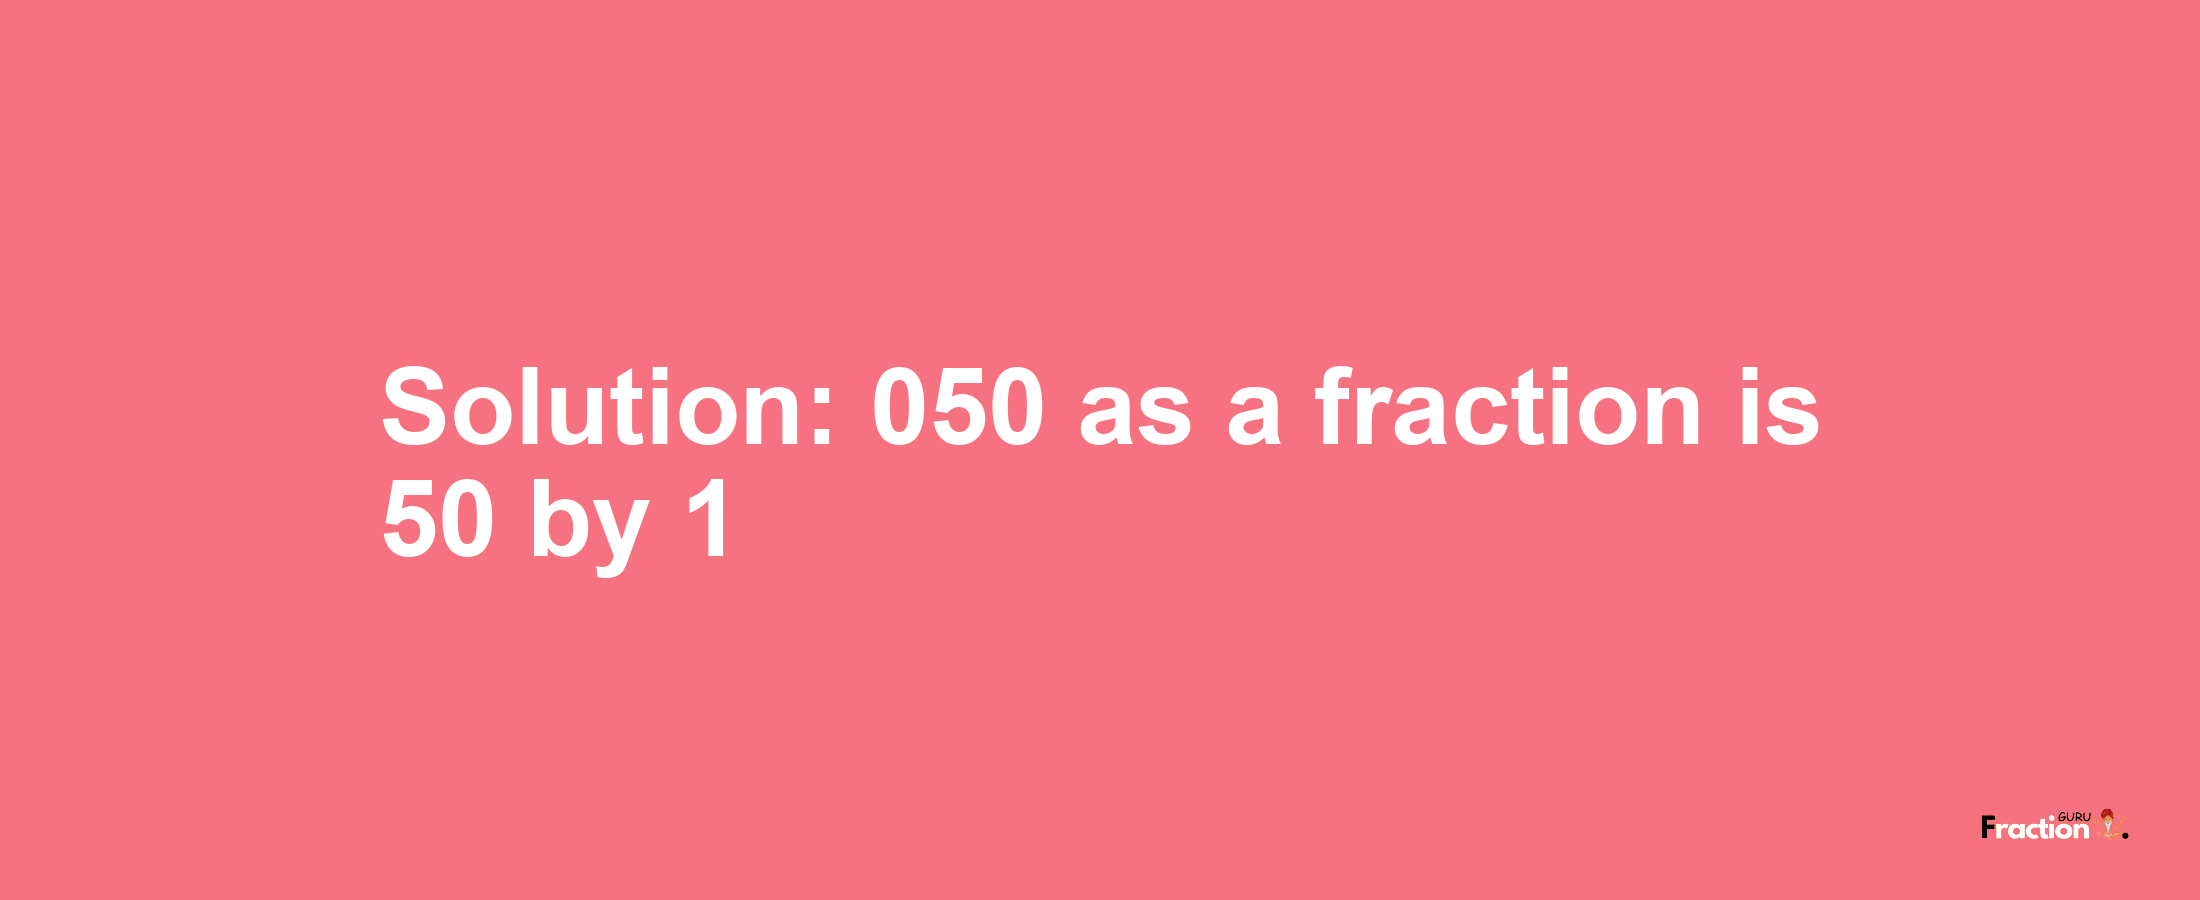 Solution:050 as a fraction is 50/1